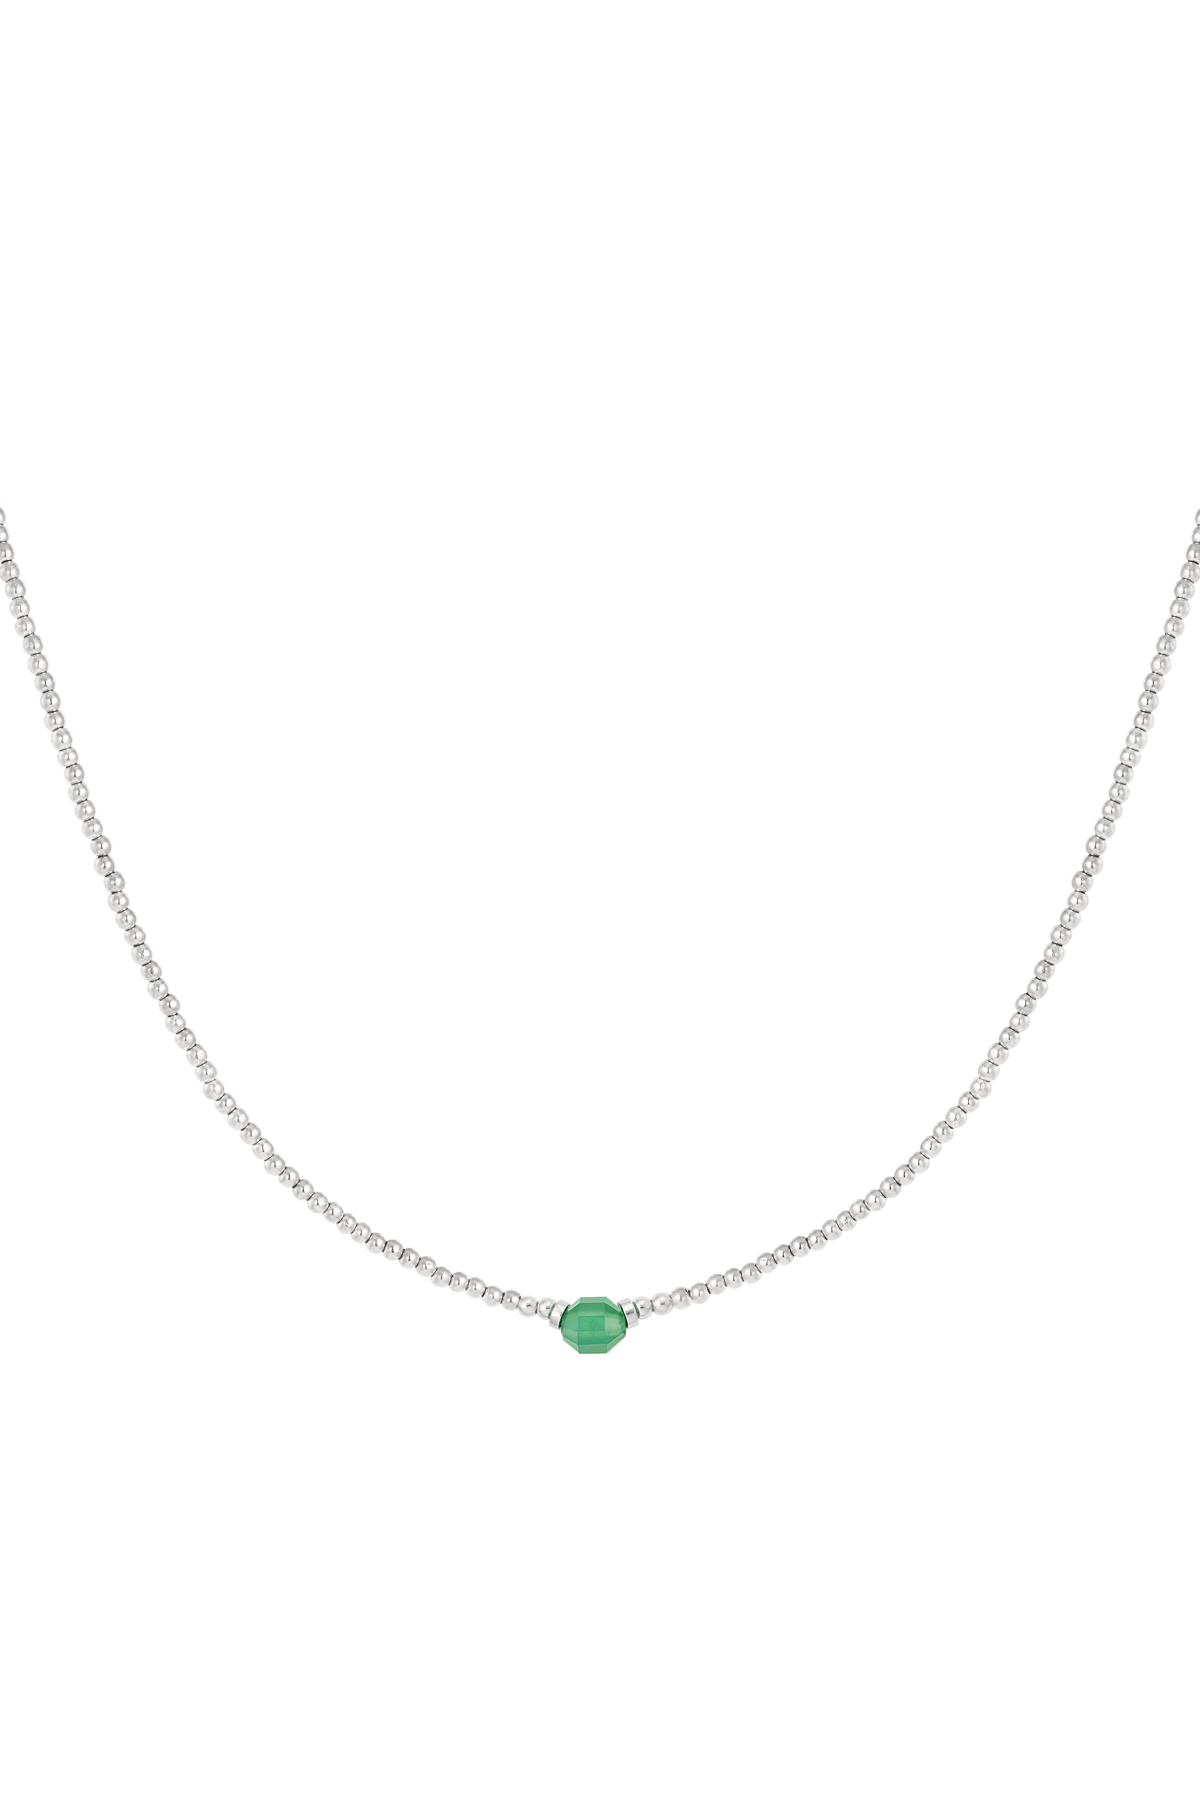 Stainless Steel Natural Stone Pendant Beaded Chain Necklace - Green & Silver h5 